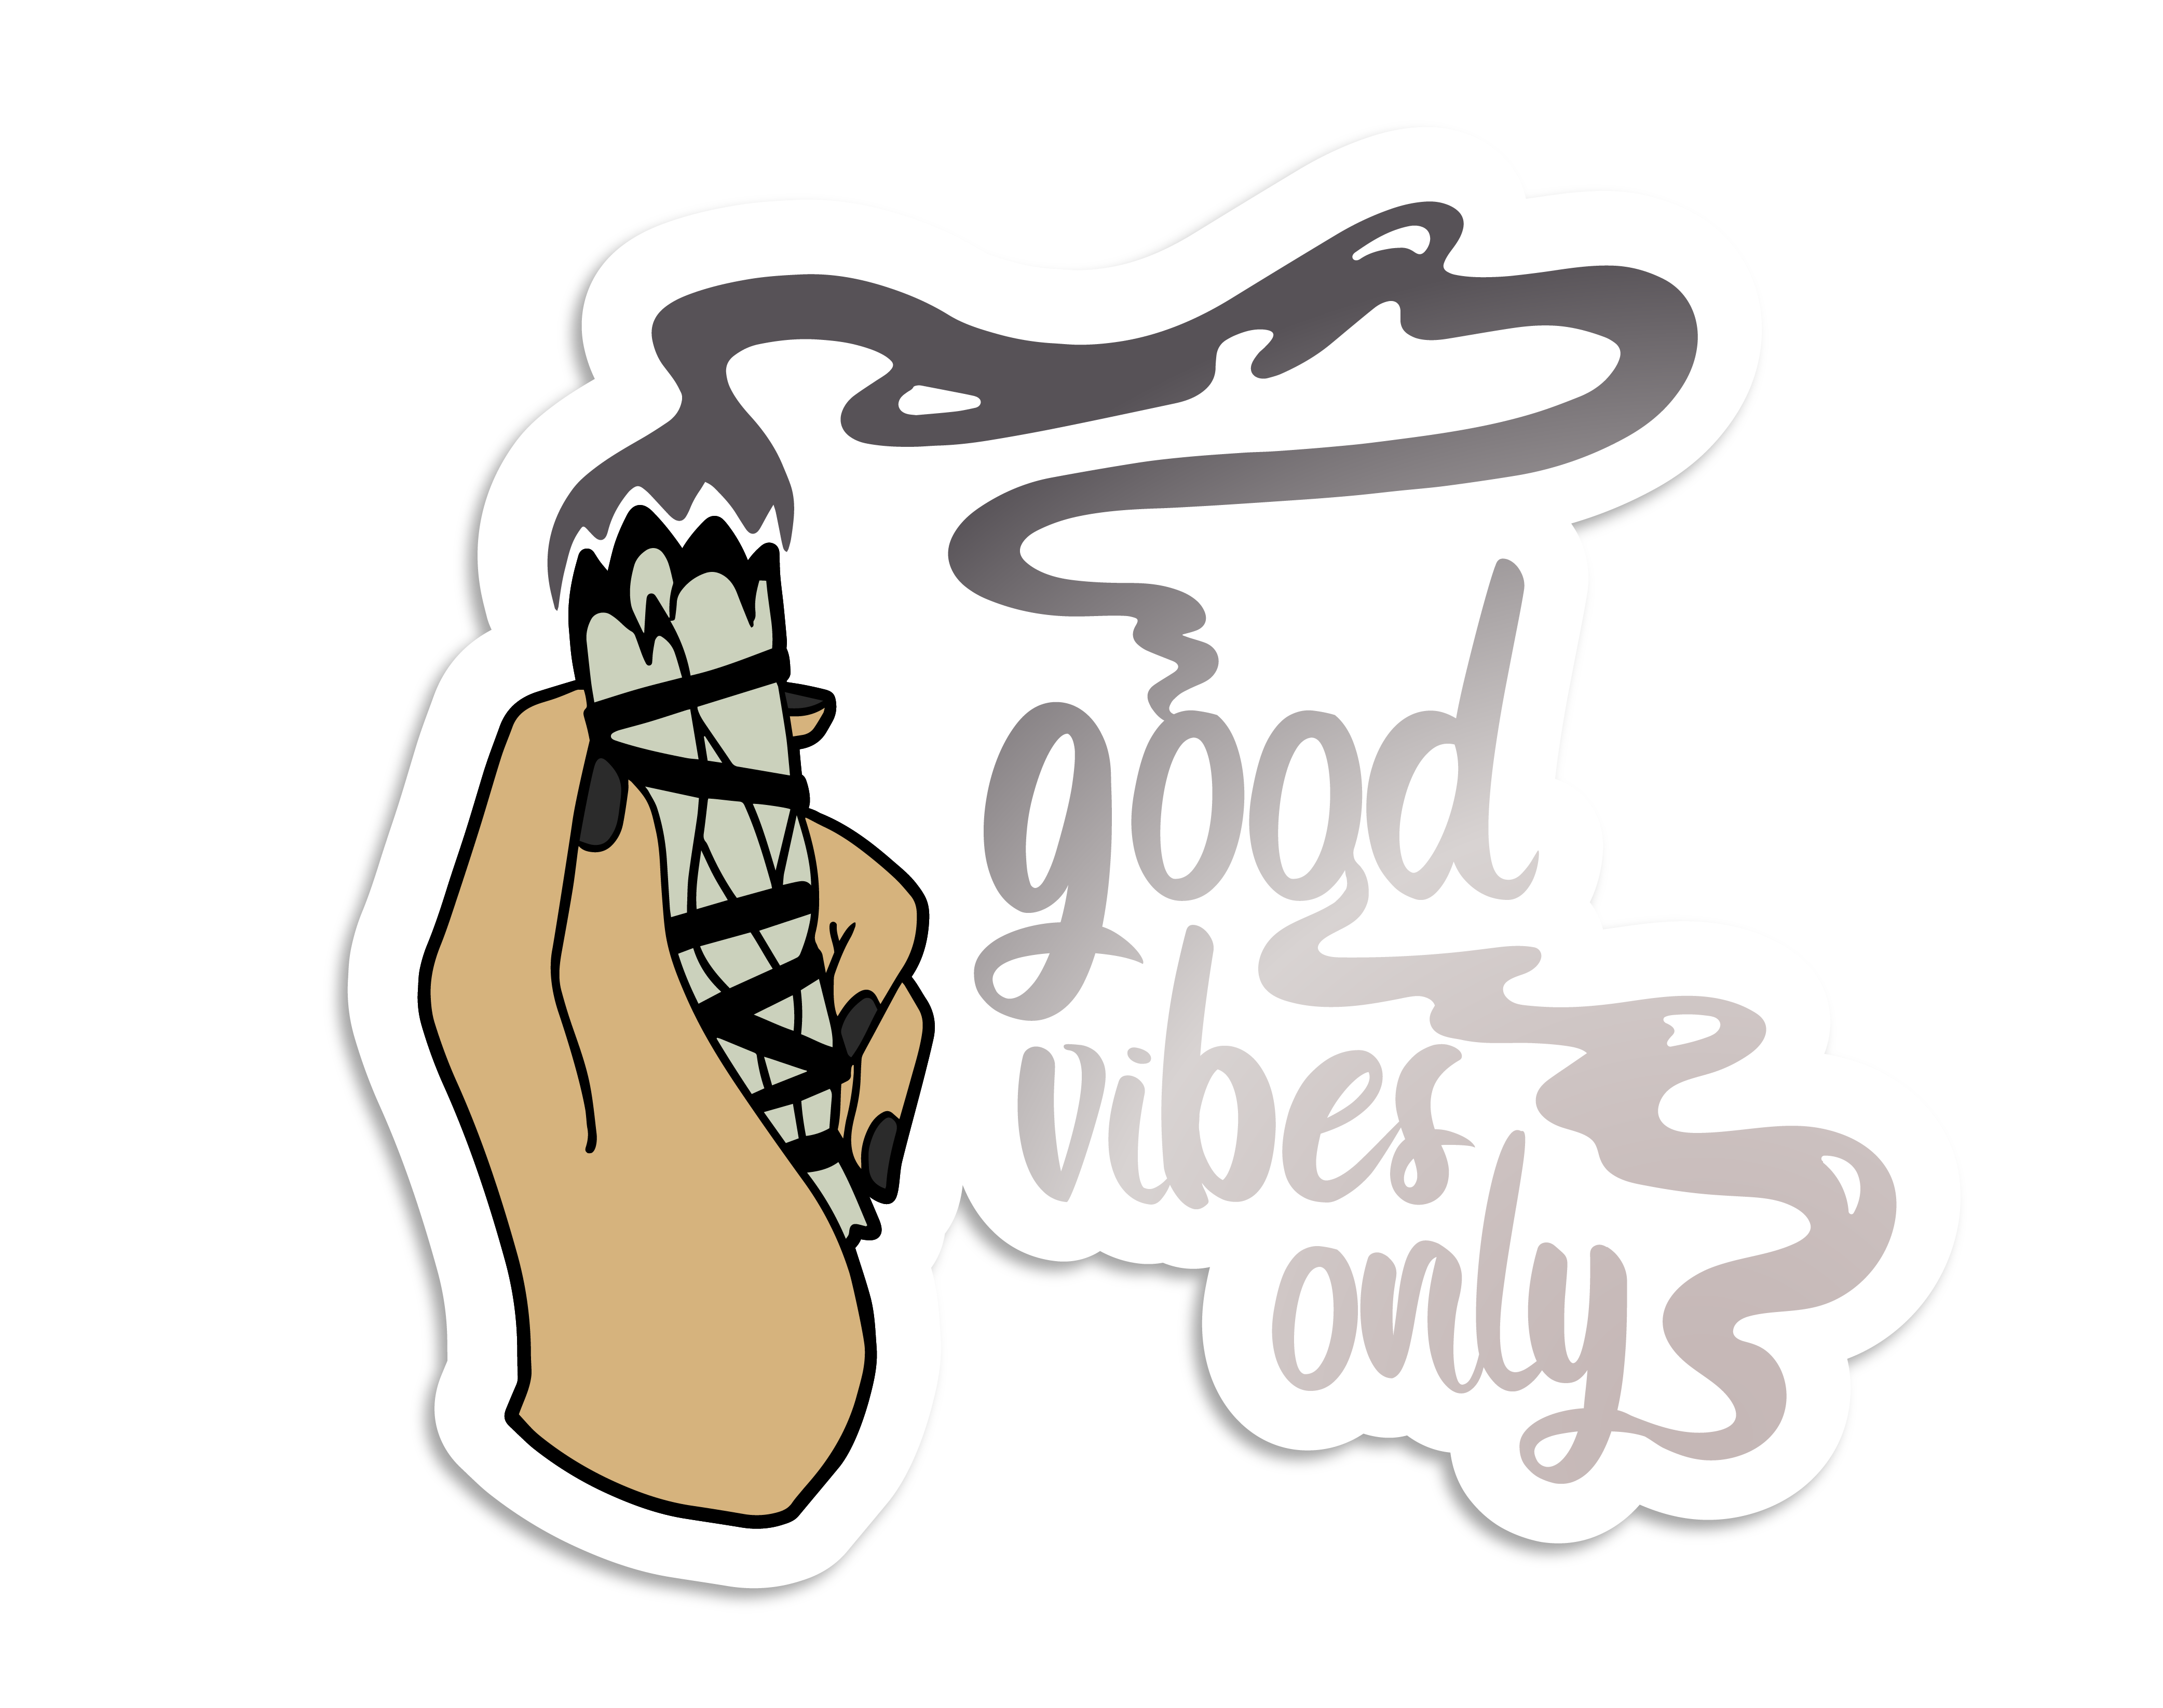 Good Vibes Only' Sticker